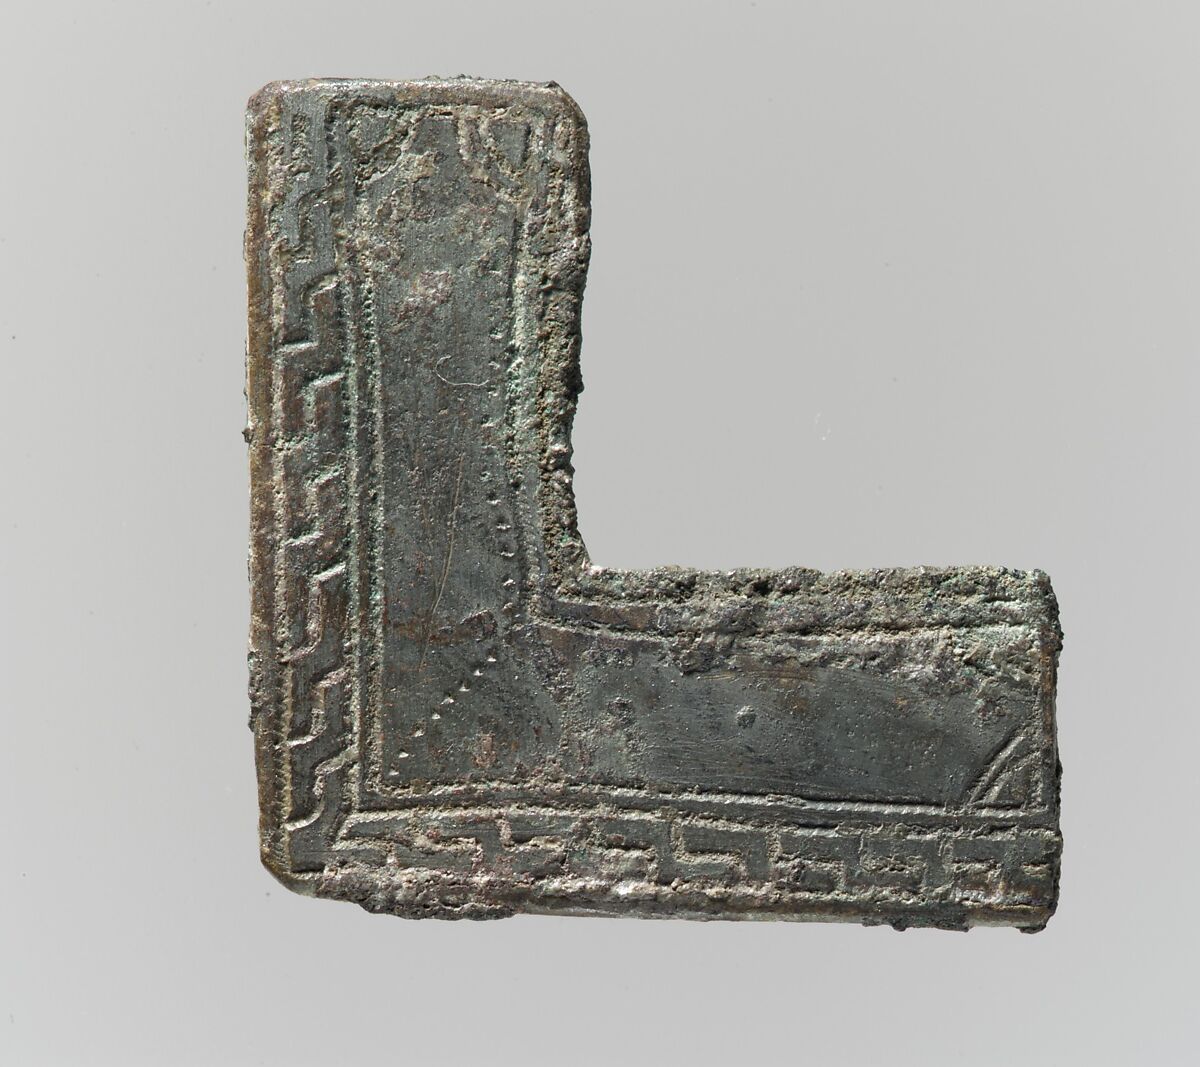 Flat Ornament, Copper alloy, "tinned" surface, Frankish 